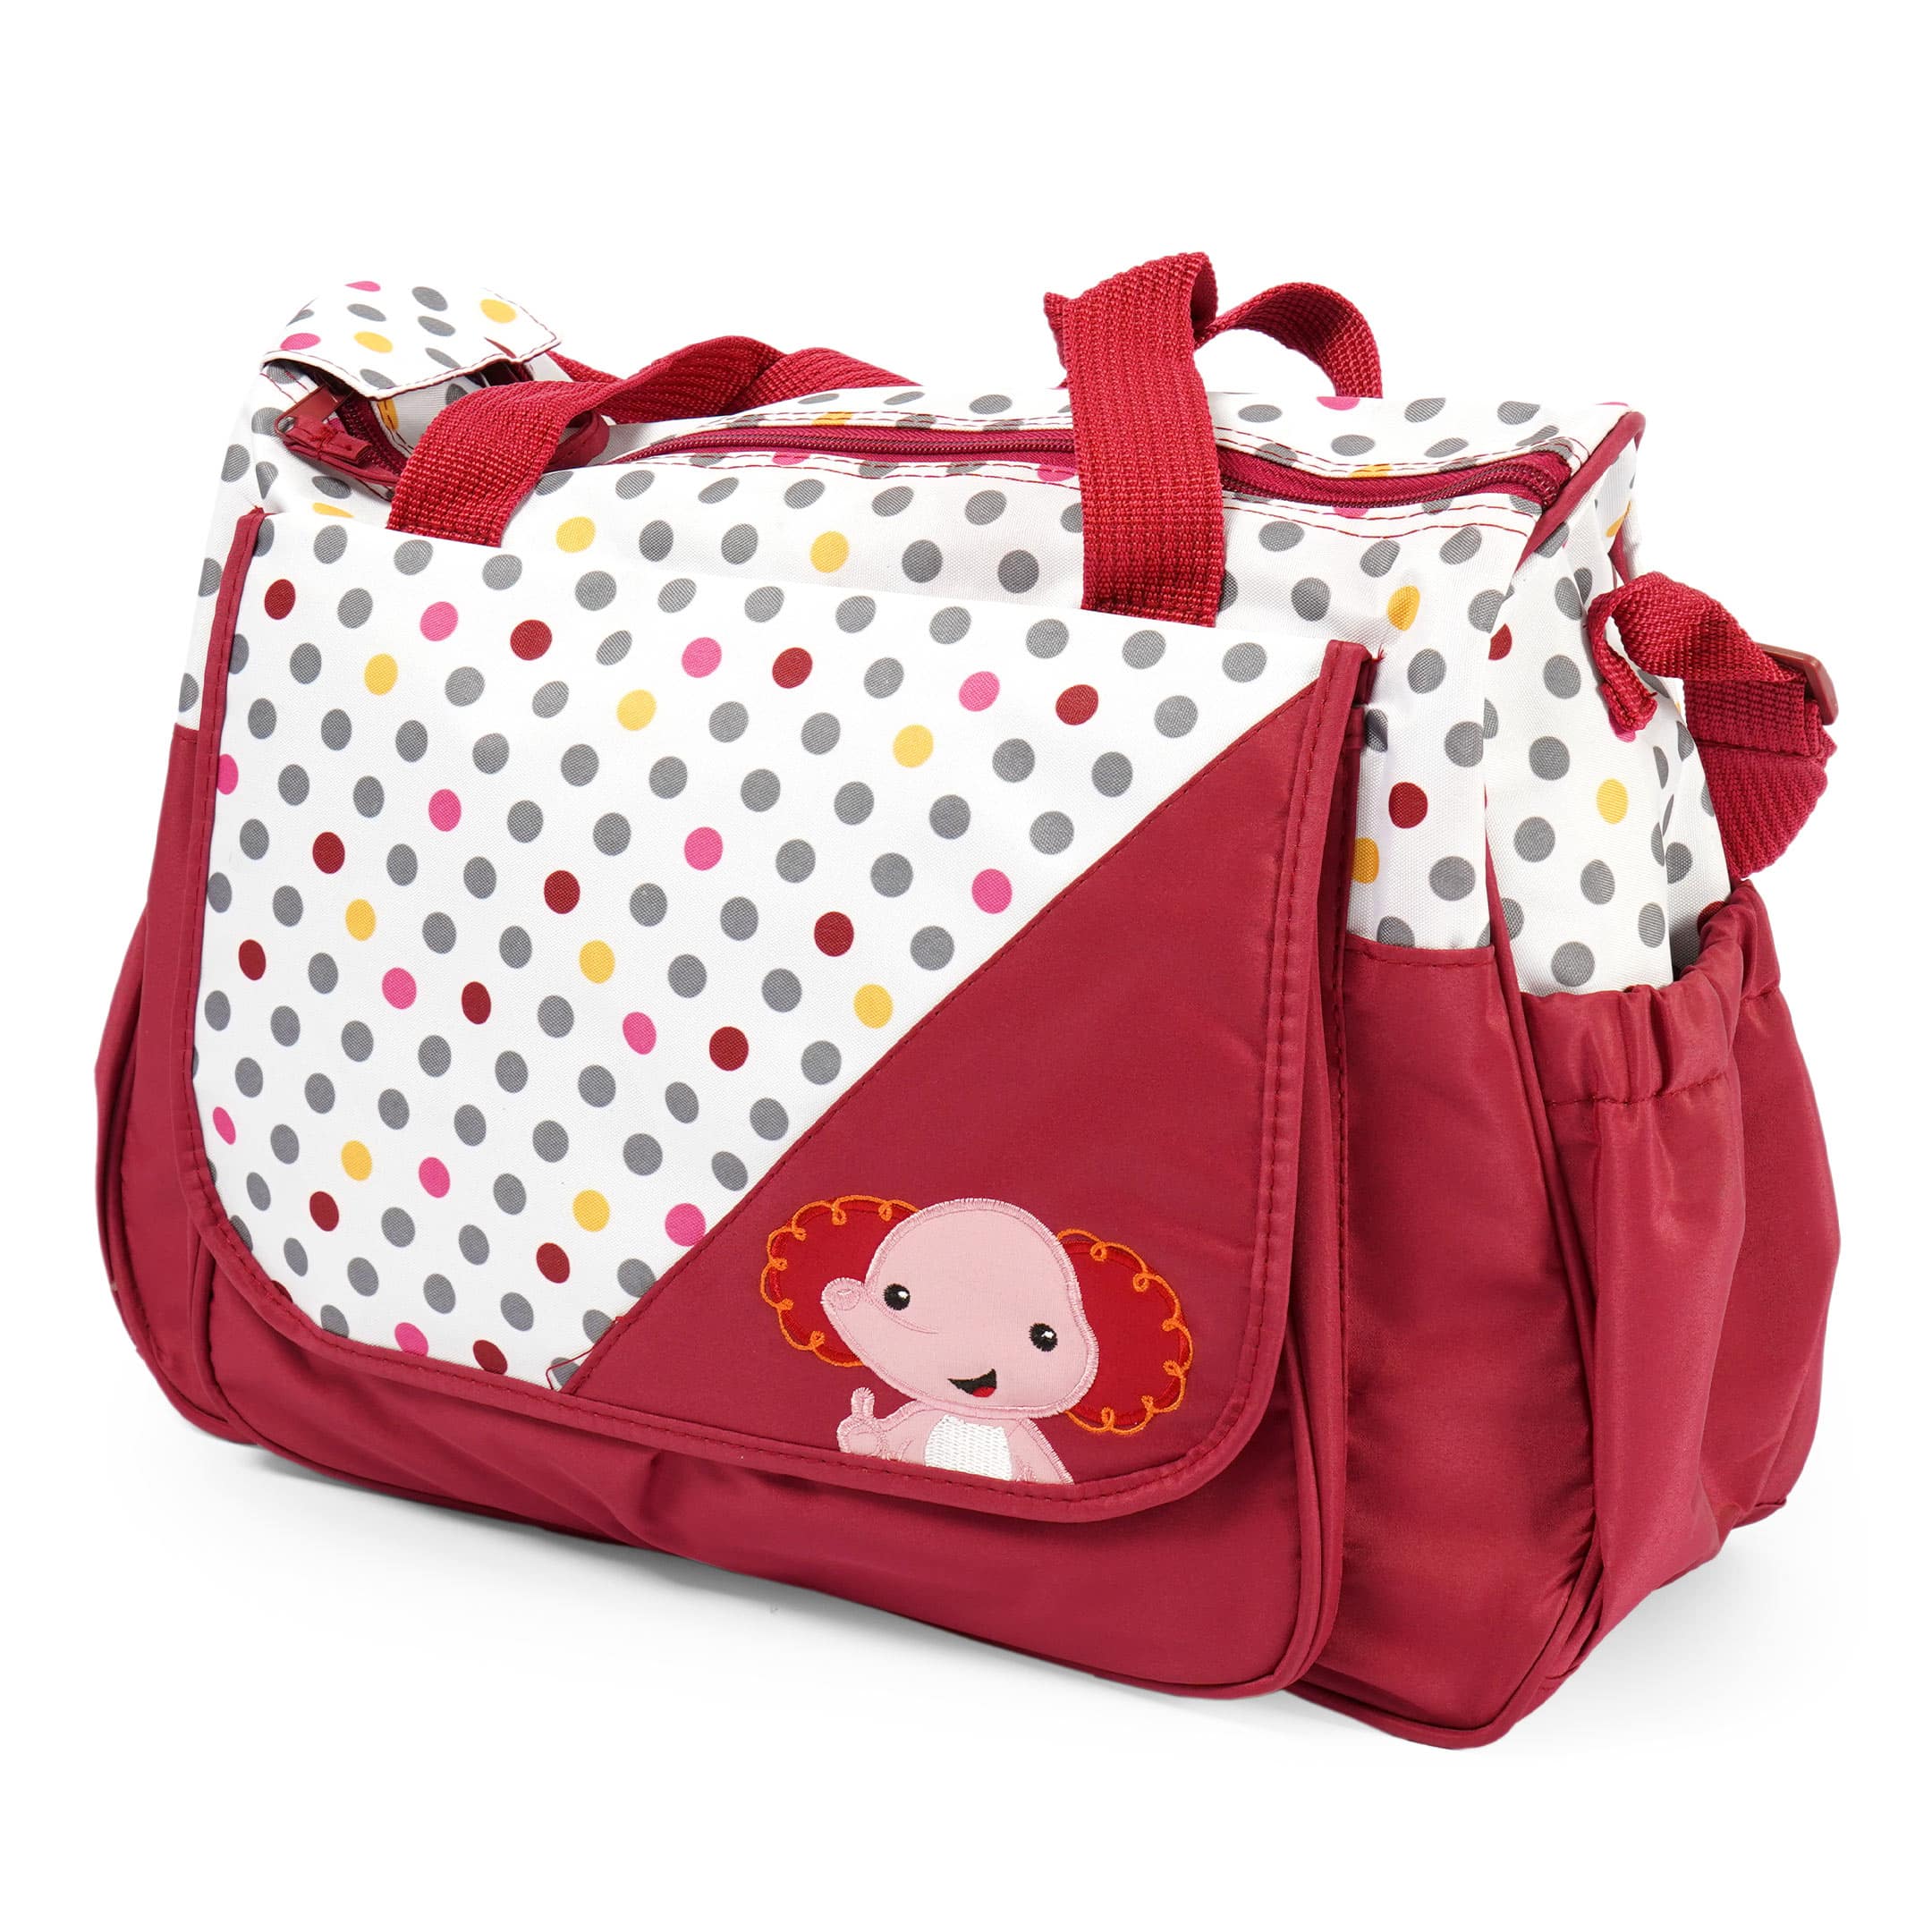 Baby Diaper Bag - Red Dotted